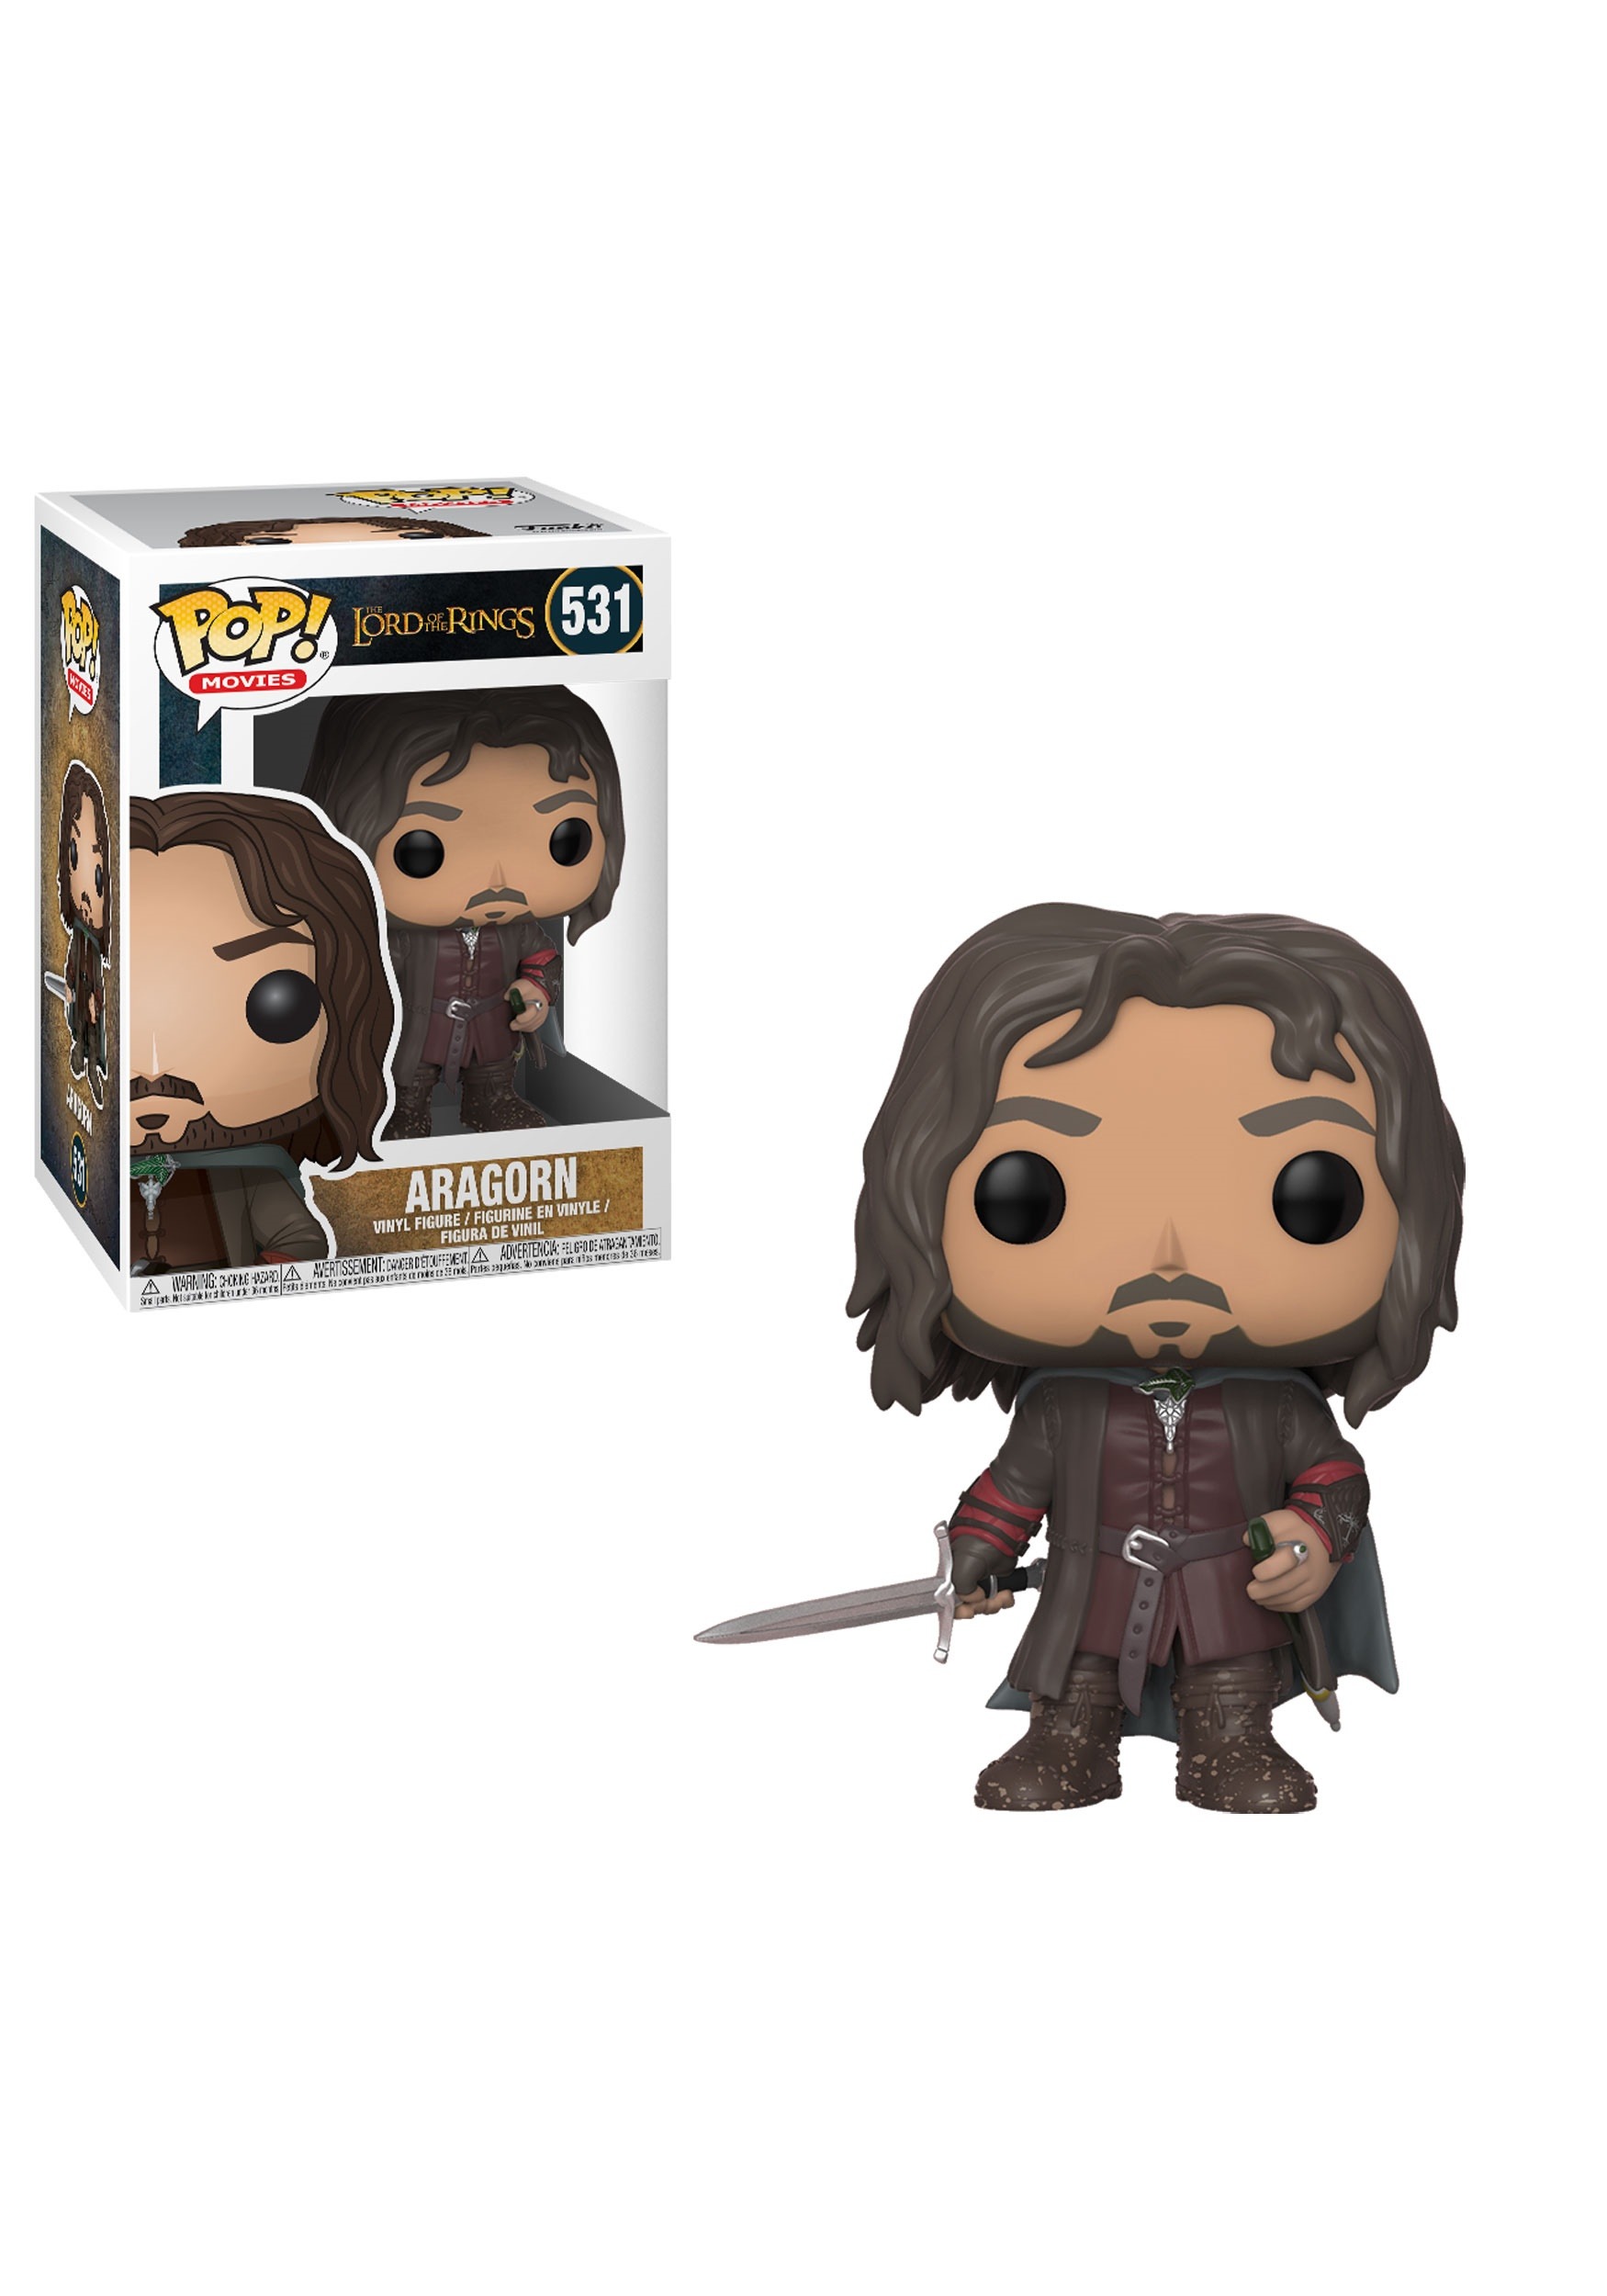 Funko POP! Movies: The Lord of the Rings - Aragorn Vinyl Figure